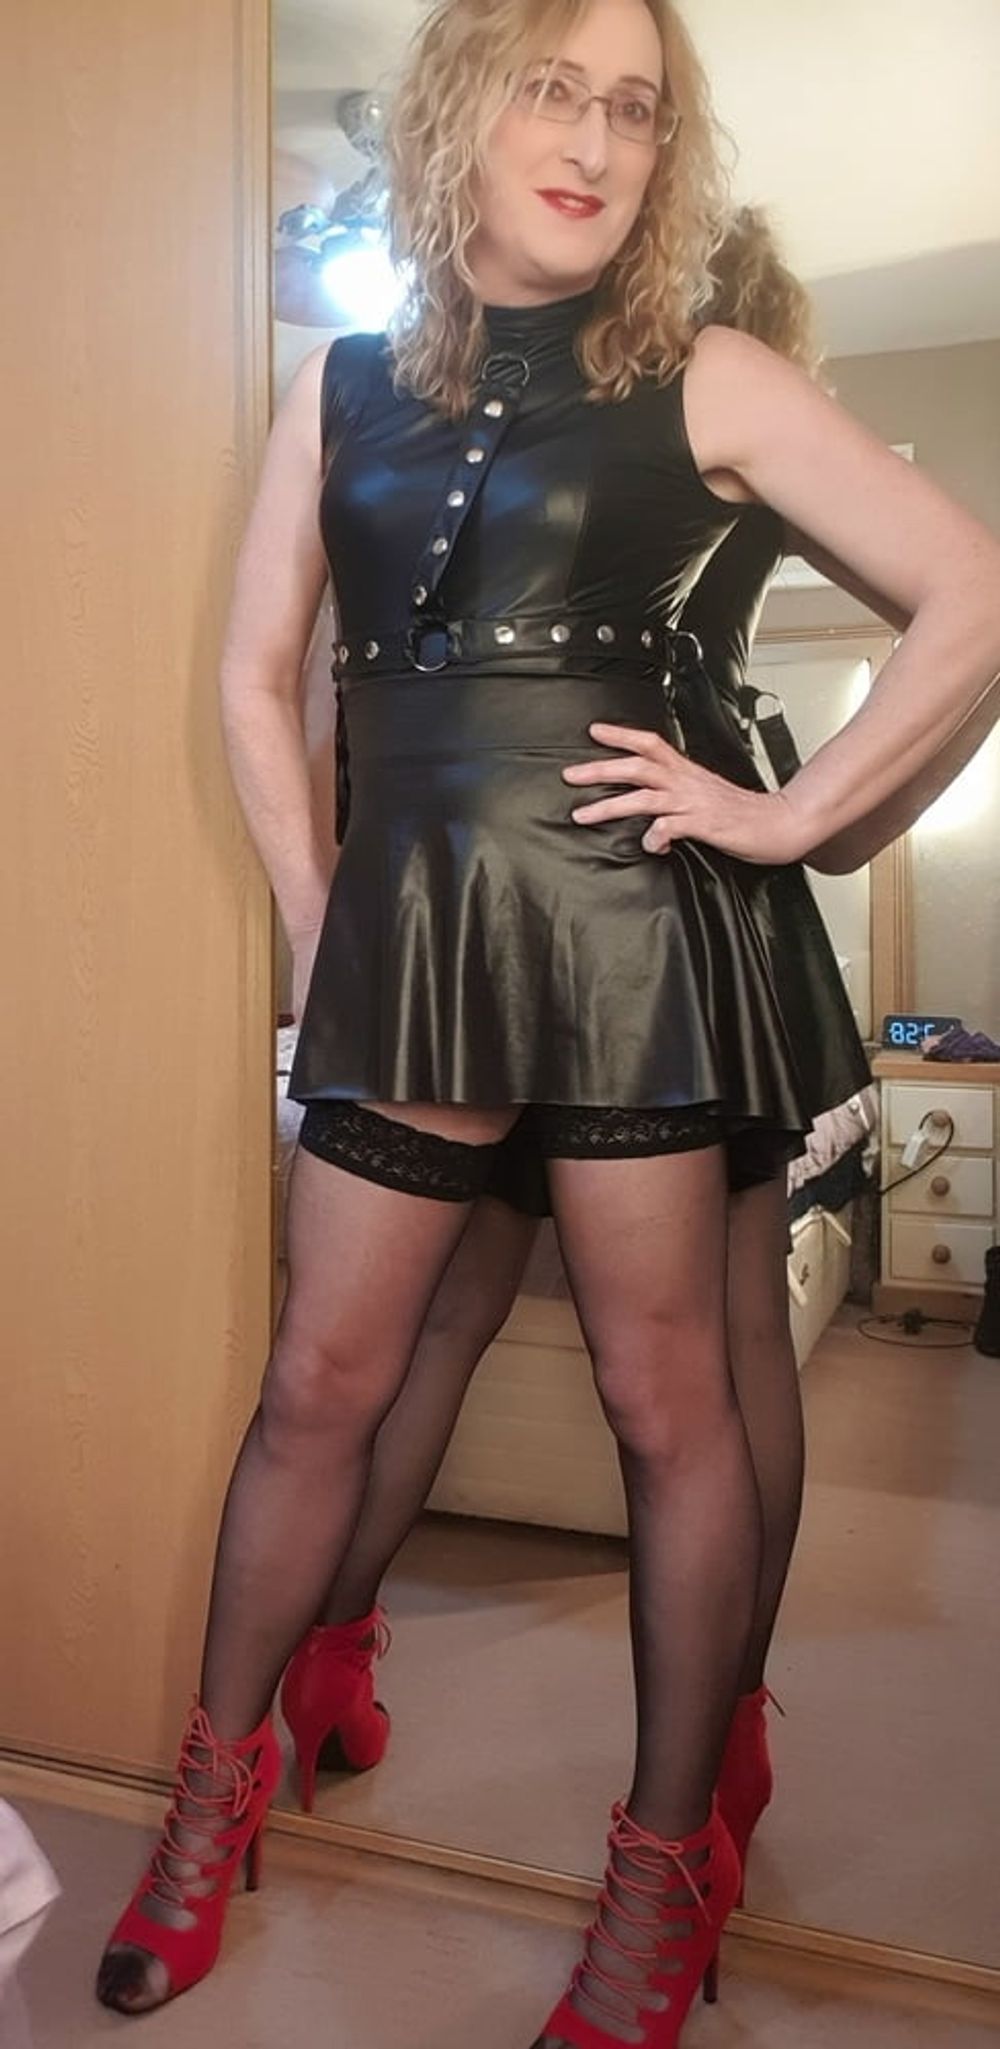 Black Wetlook outfit with suspenders and stockings